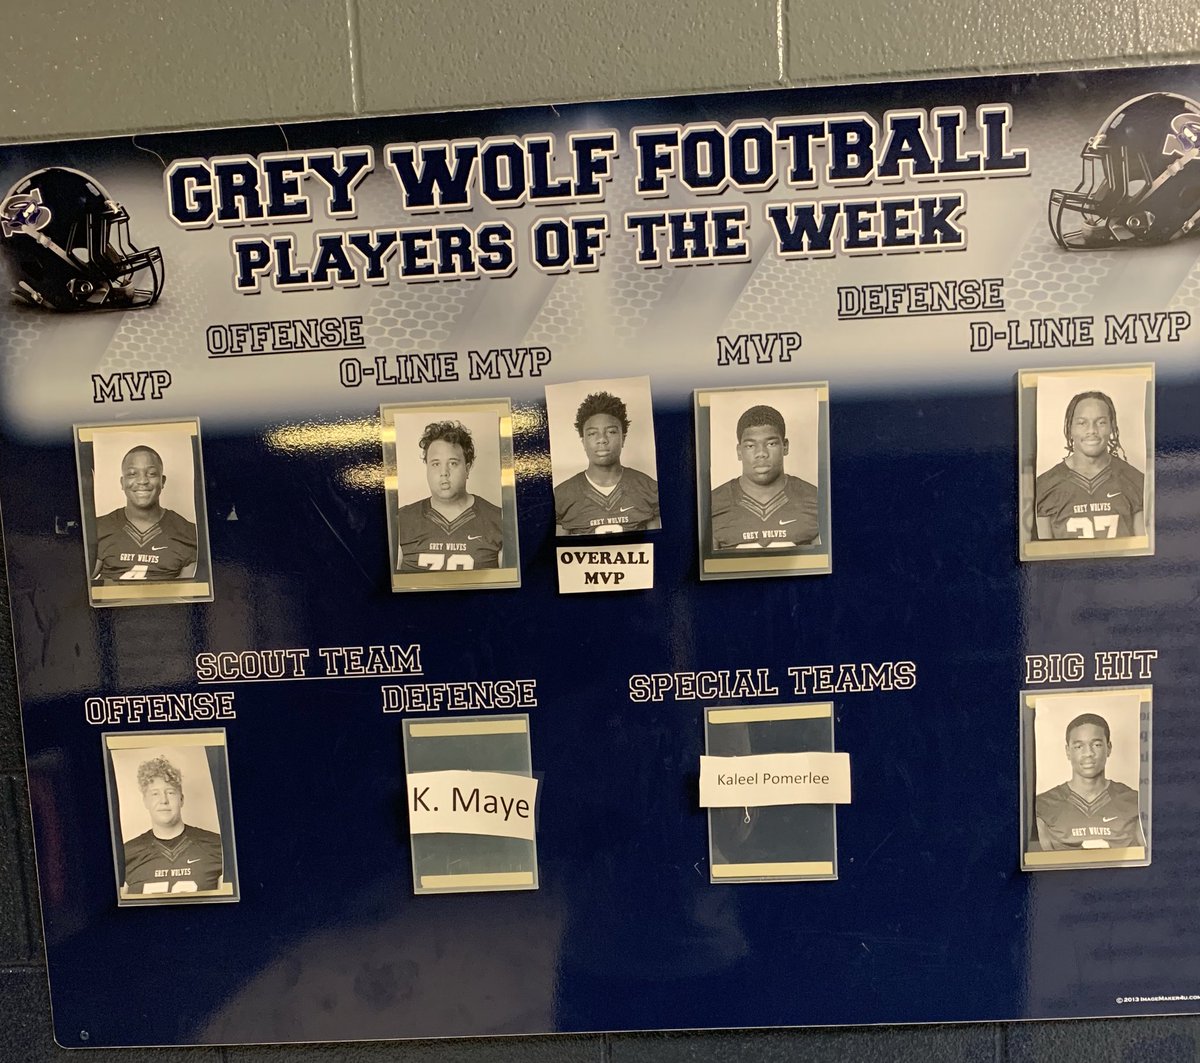 Congratulations to our week two players of the week! #Shoefootball